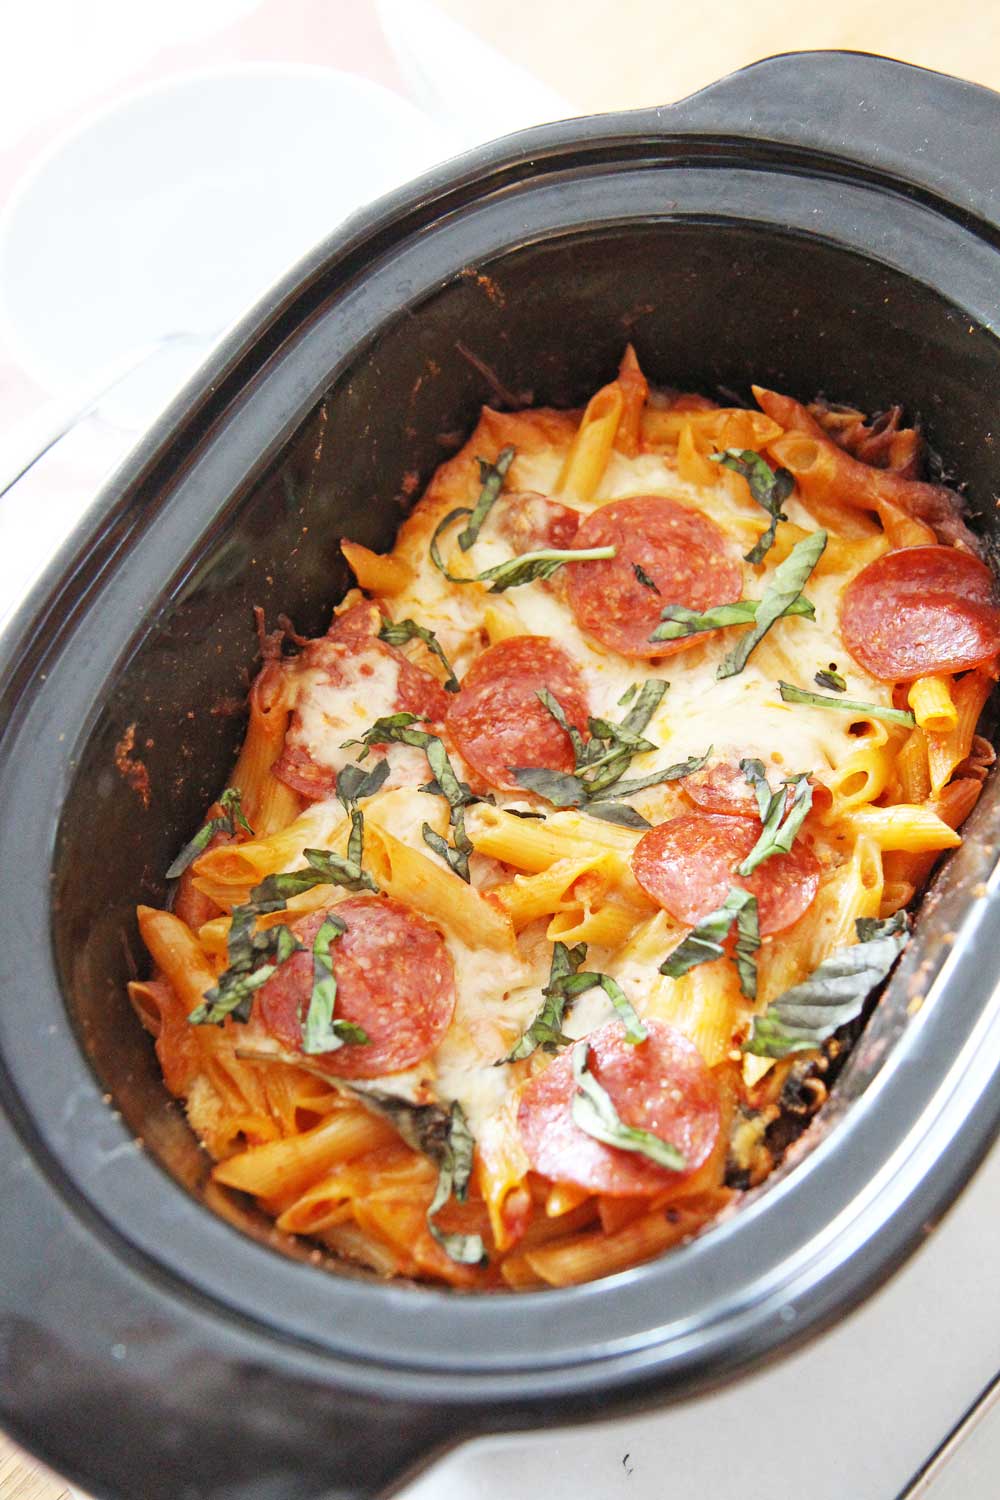 How to Make Baked Ziti in a Slow Cooker. All you need is pasta, ricotta cheese, marinara sauce, mozzarella, and pepperoni. This is an easy recipes for busy moms and families. Happy Cooking! www.ChopHappy.com #bakedziti #slowcookerpasta